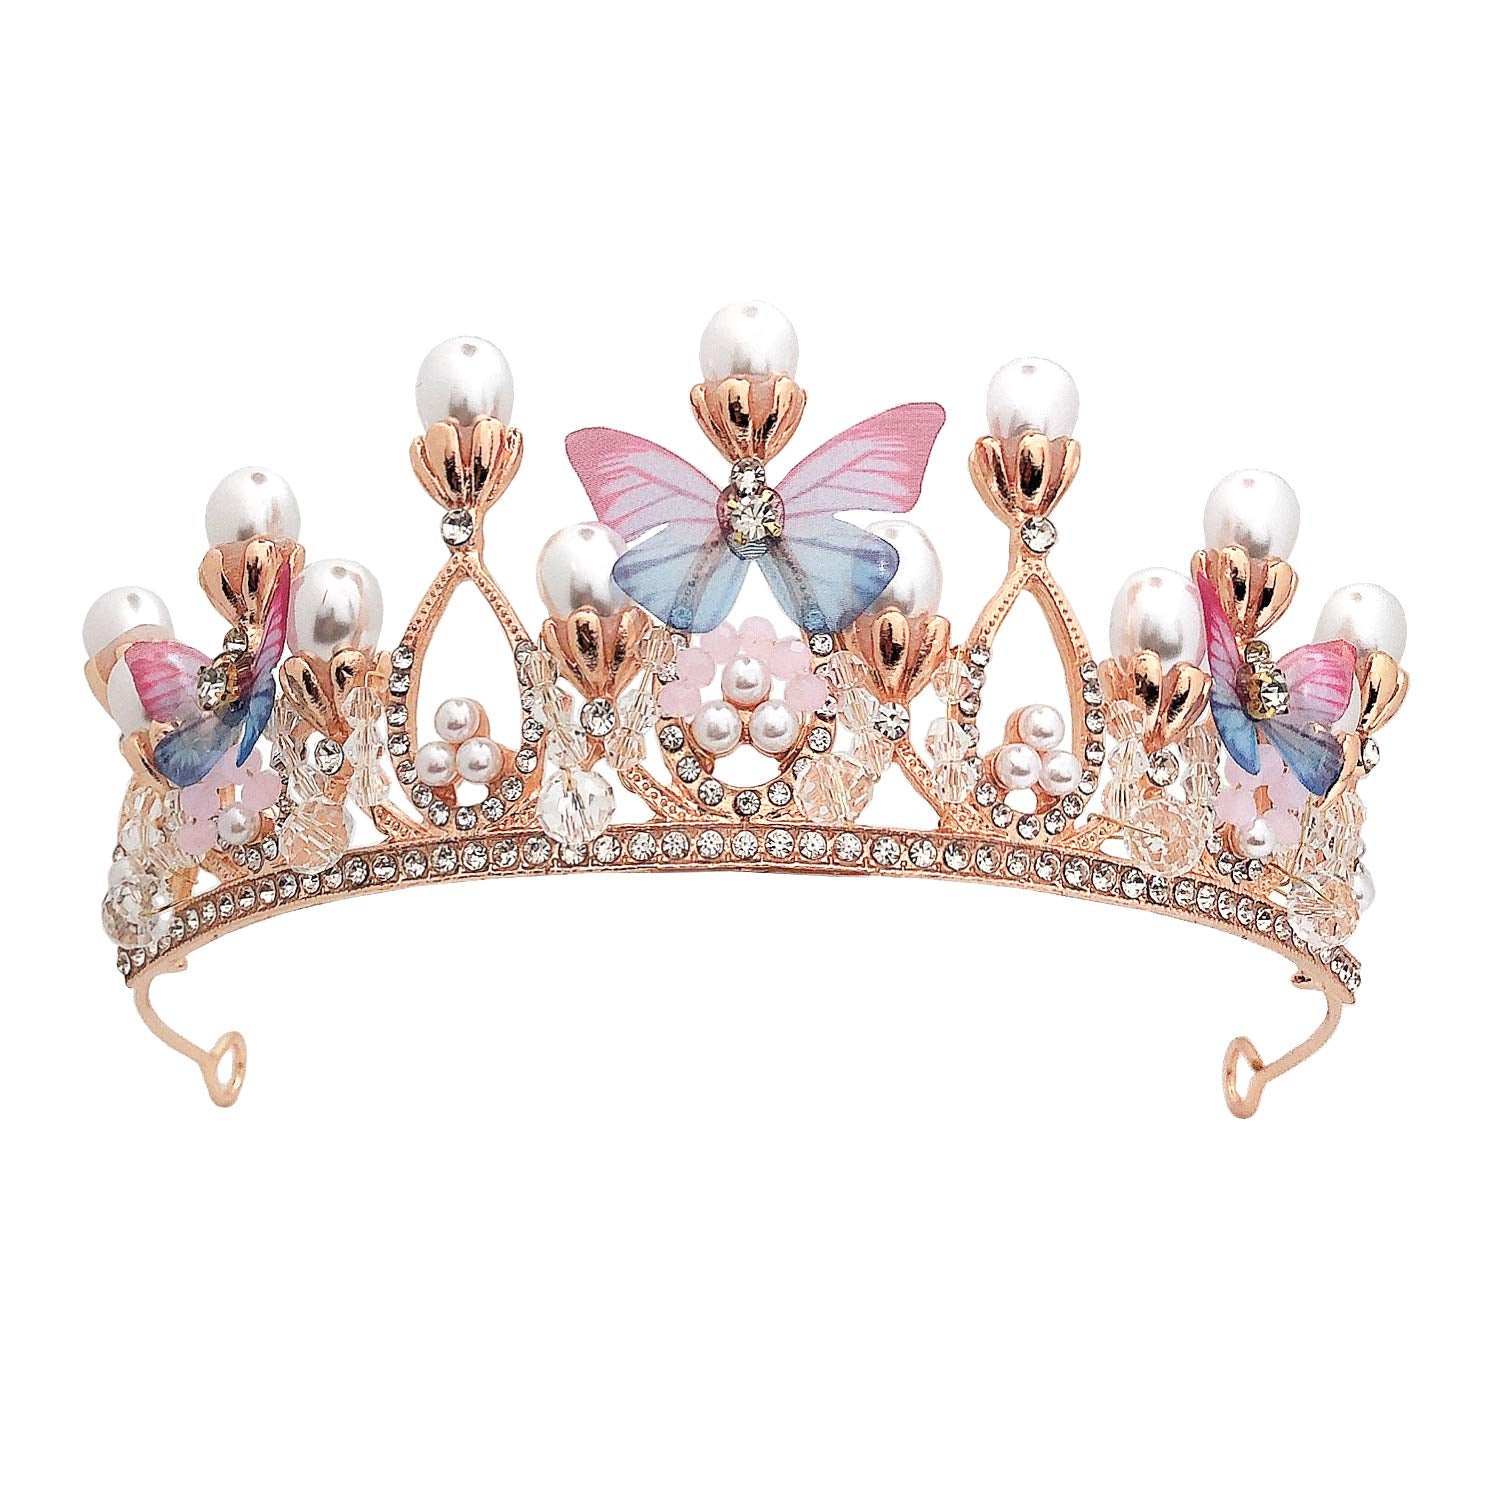 BigTree Crystal Tiara Pearl Princess Costume Crown Headband Pageant Bridal Wedding Hair Accessories Cosplay,Birthday, Celebration, Holiday,Costume Party Gift for Girls 5-16 Years (Dia.14 cm)